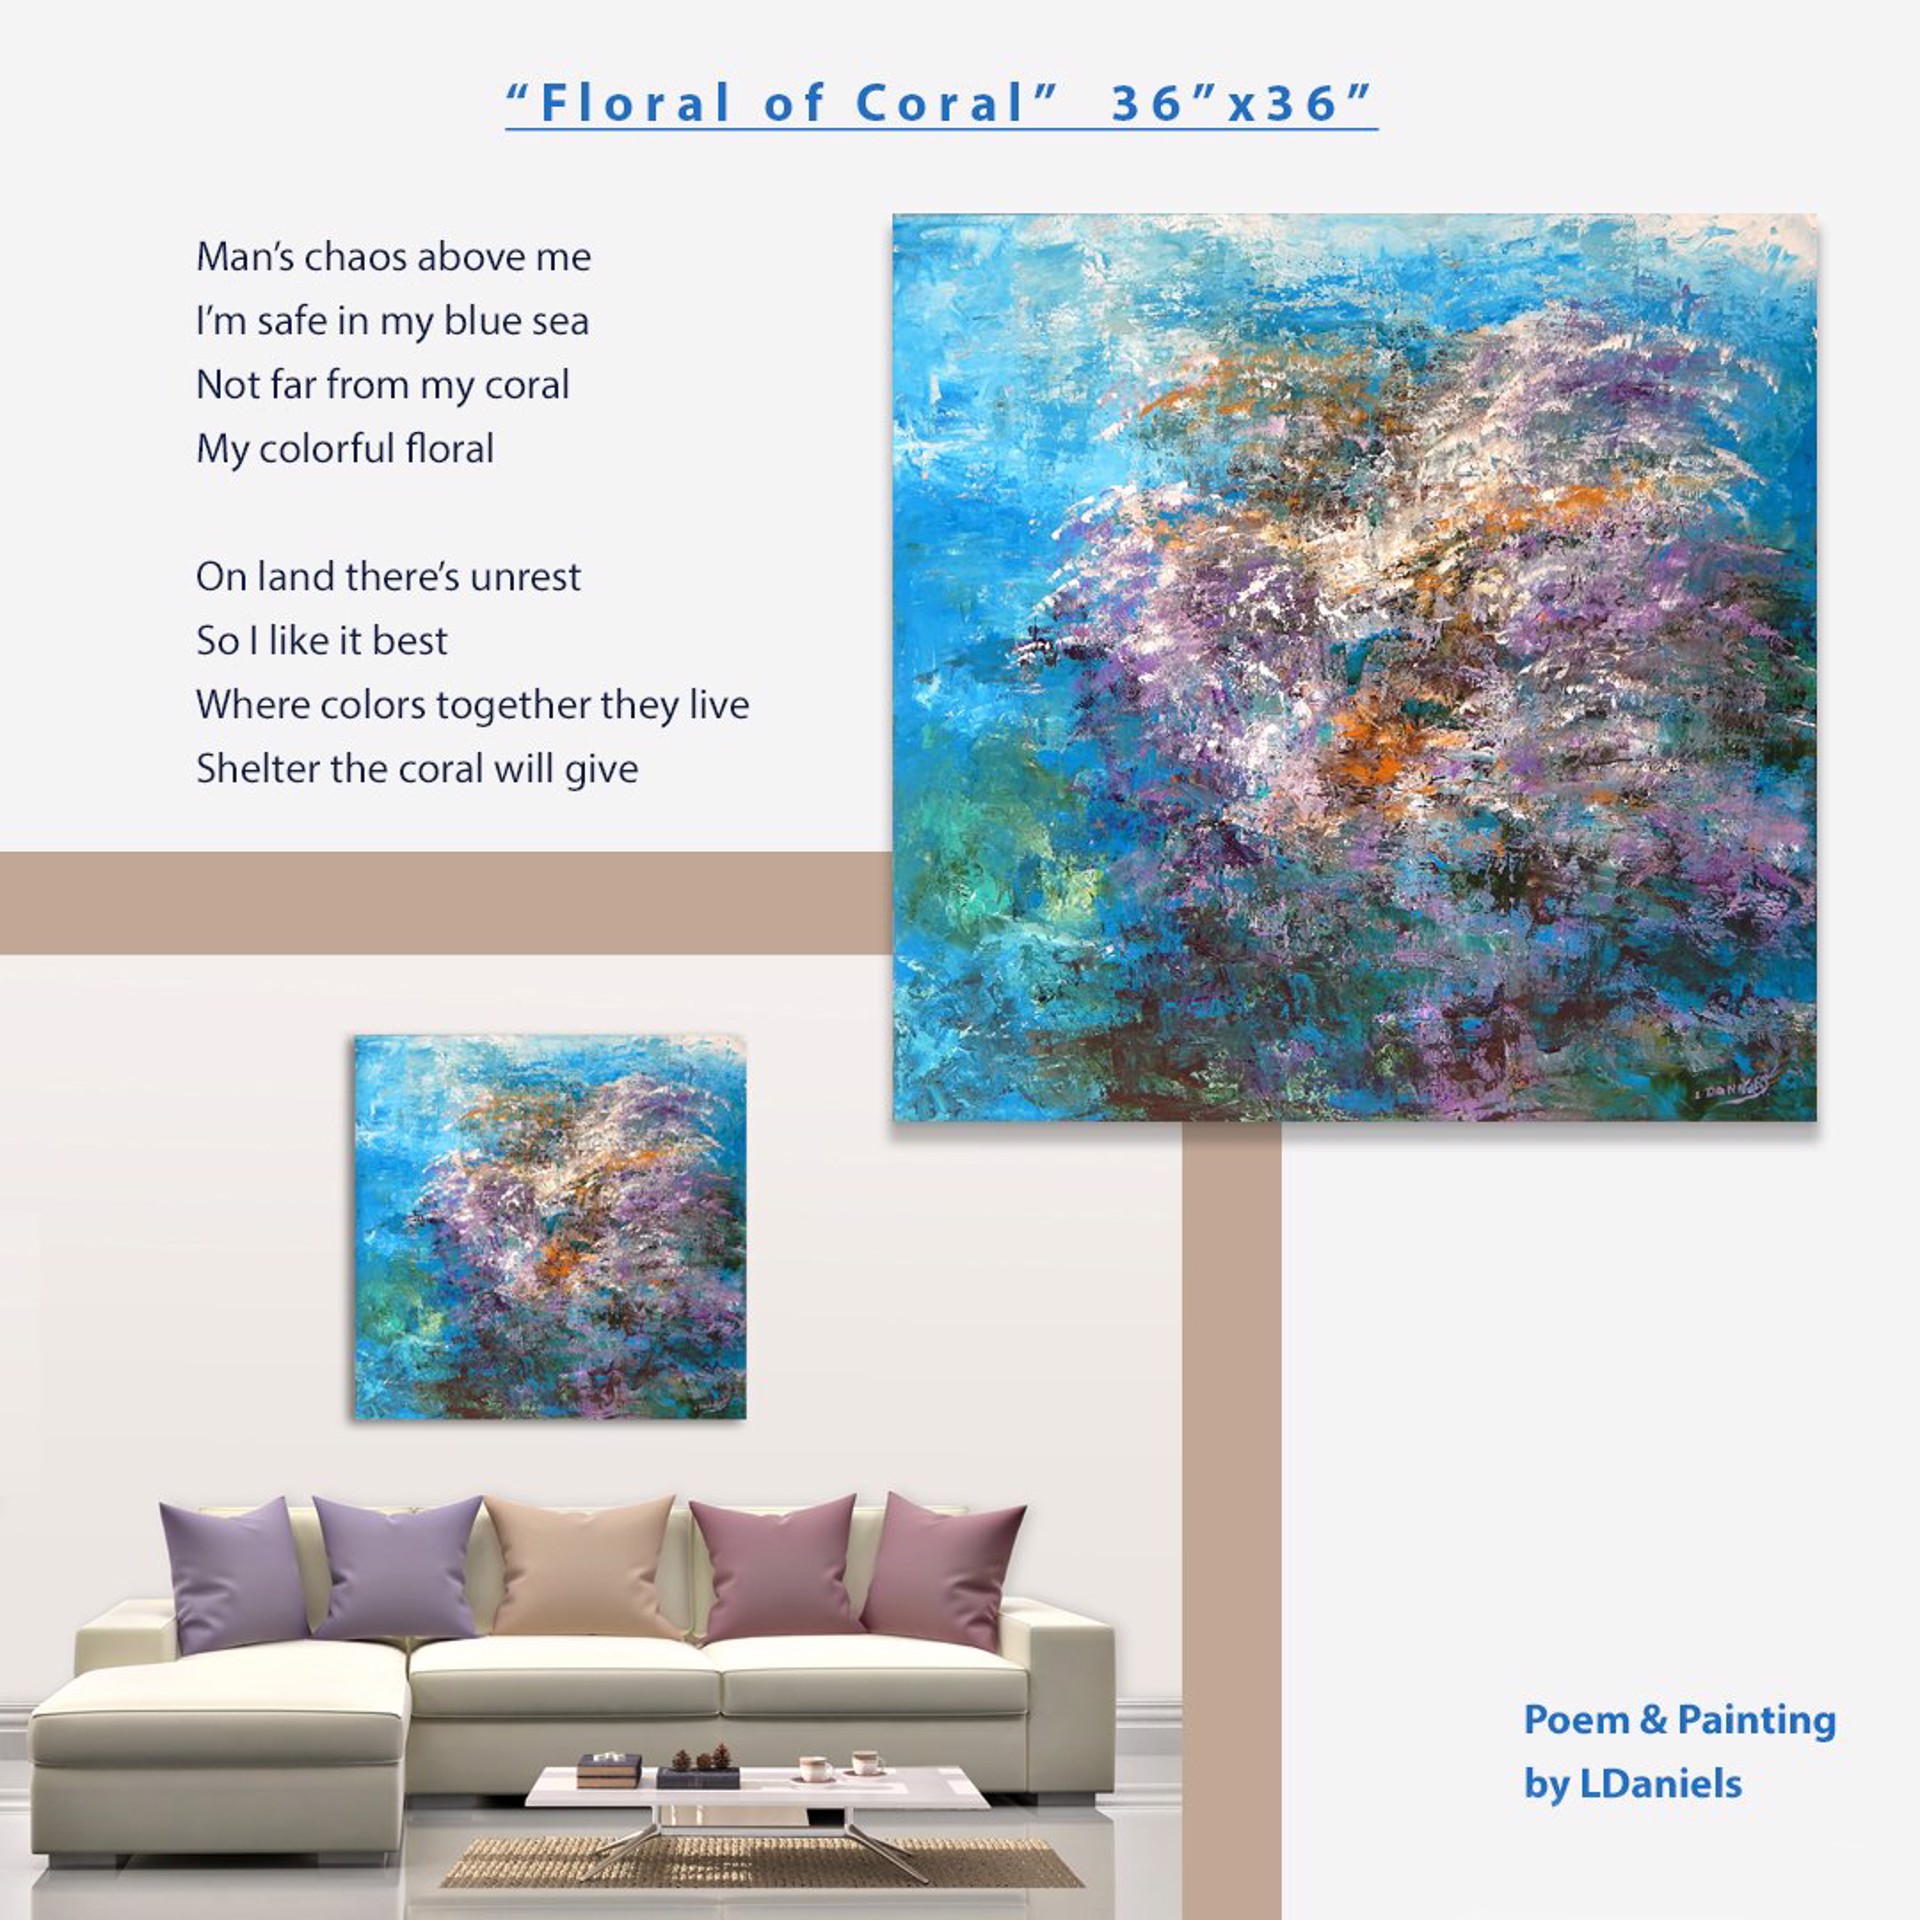 Floral of Coral by Lisa Daniels